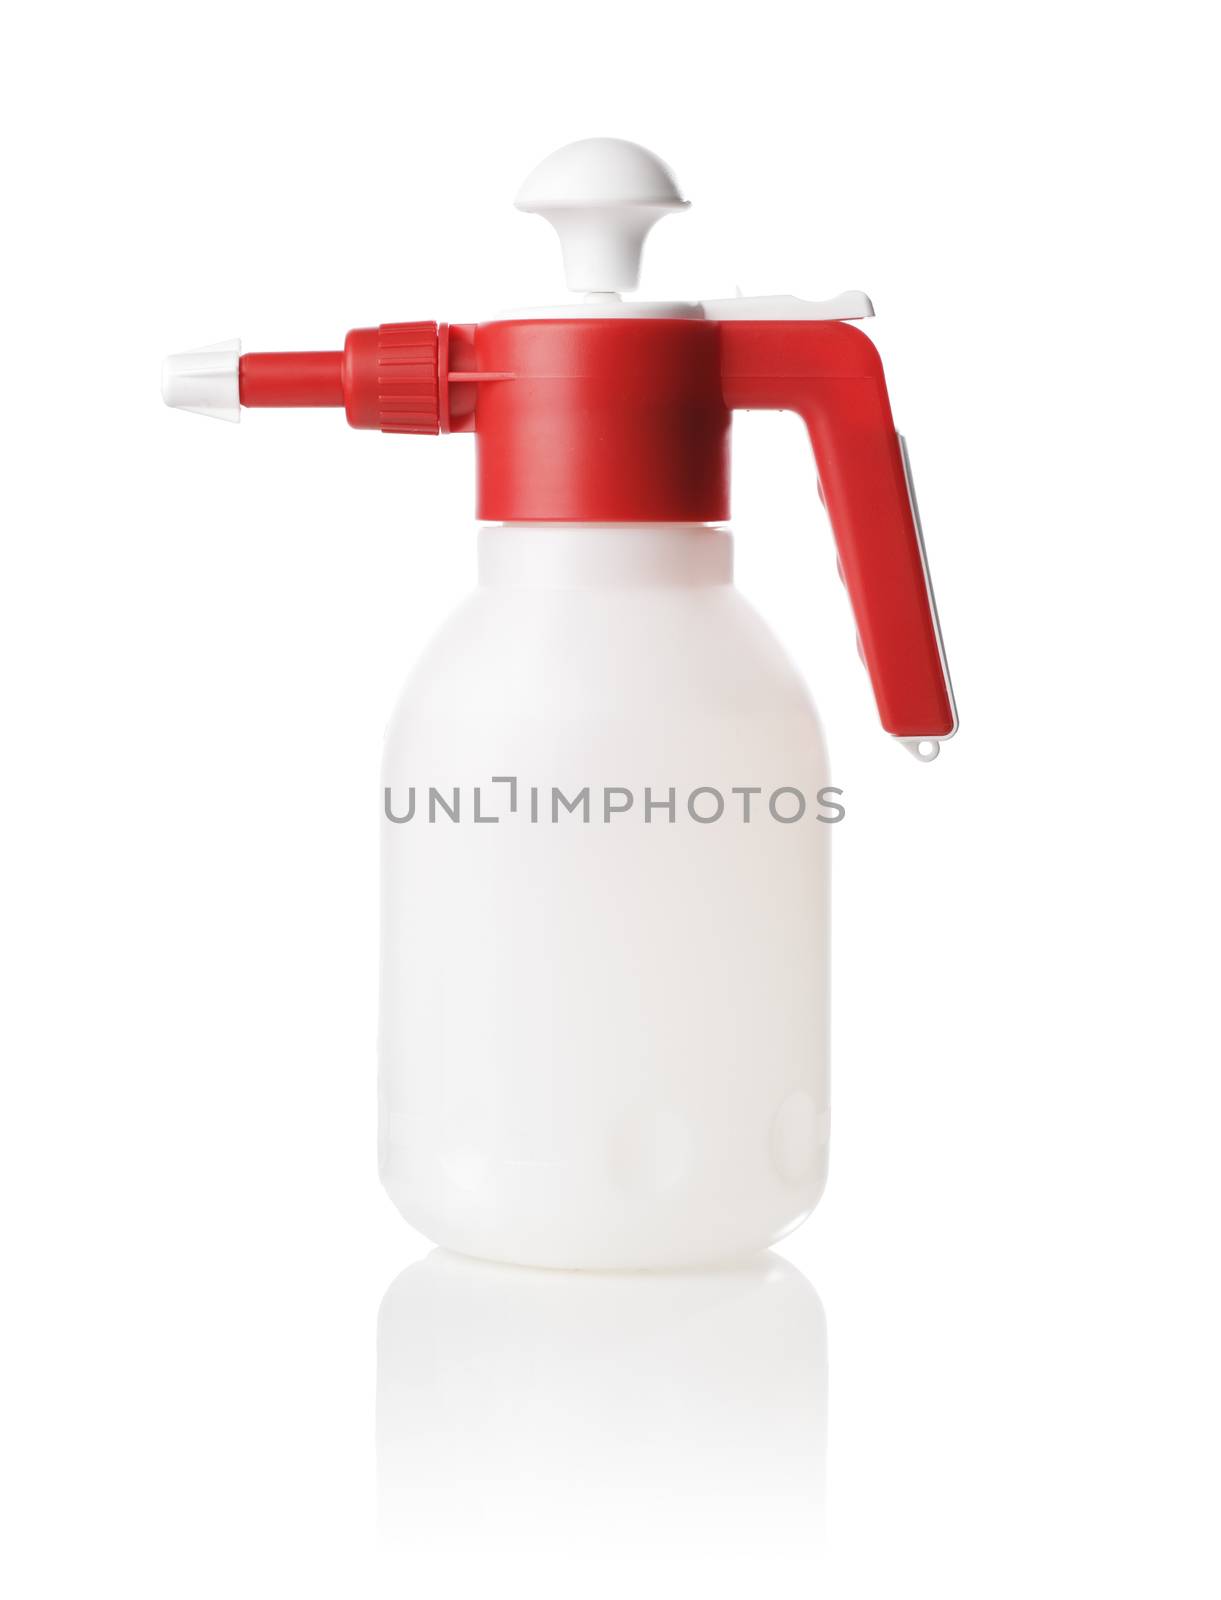 A Pump-style spray bottle isolated on white with natural shadow.